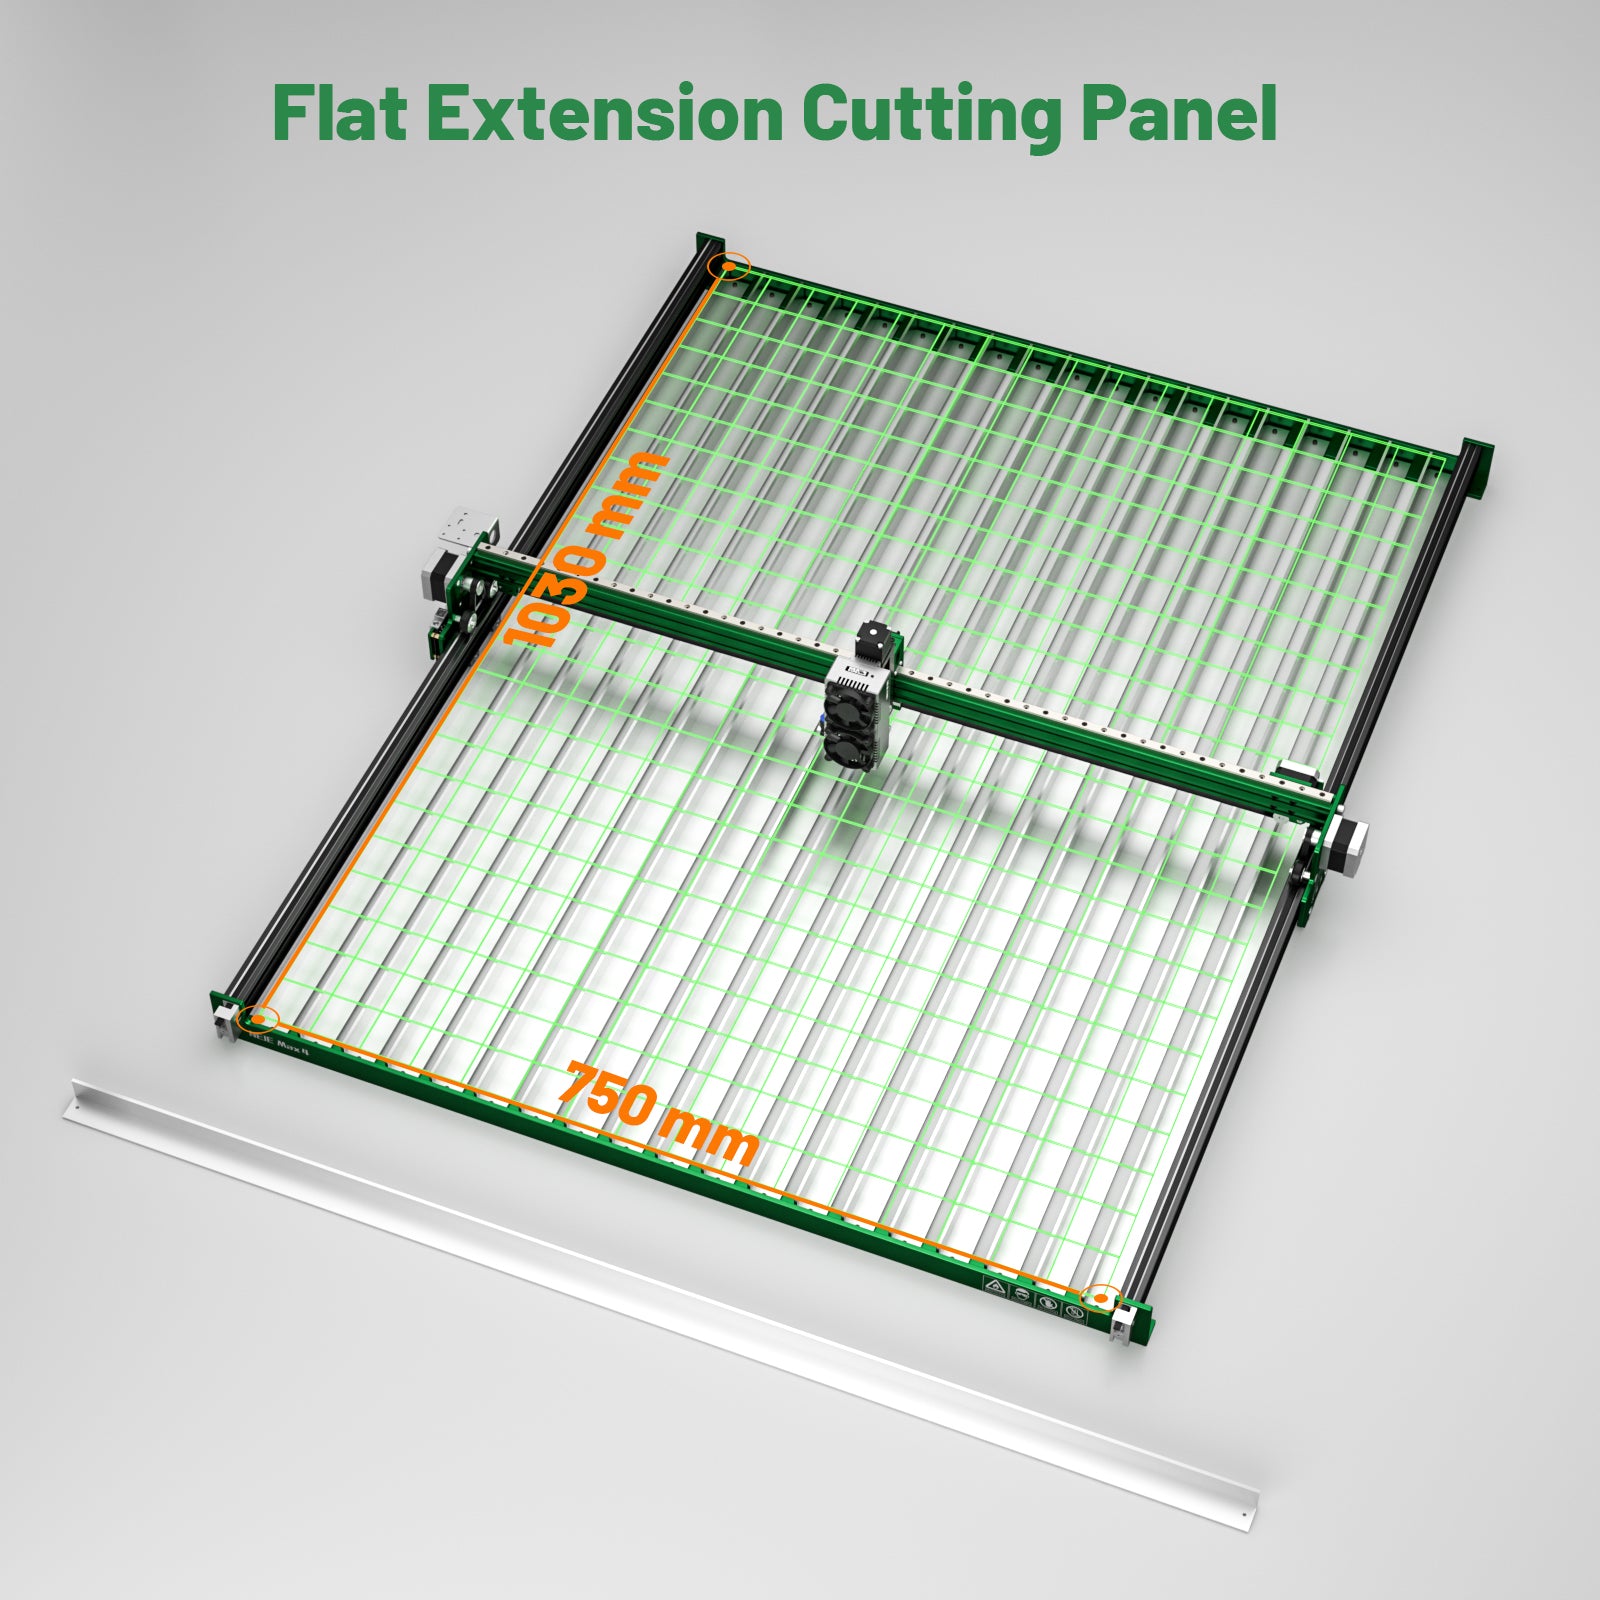 Flat Extension Cutting Panel for NEJE Max 4 Laser Engraver (After Y-axis enlarges)